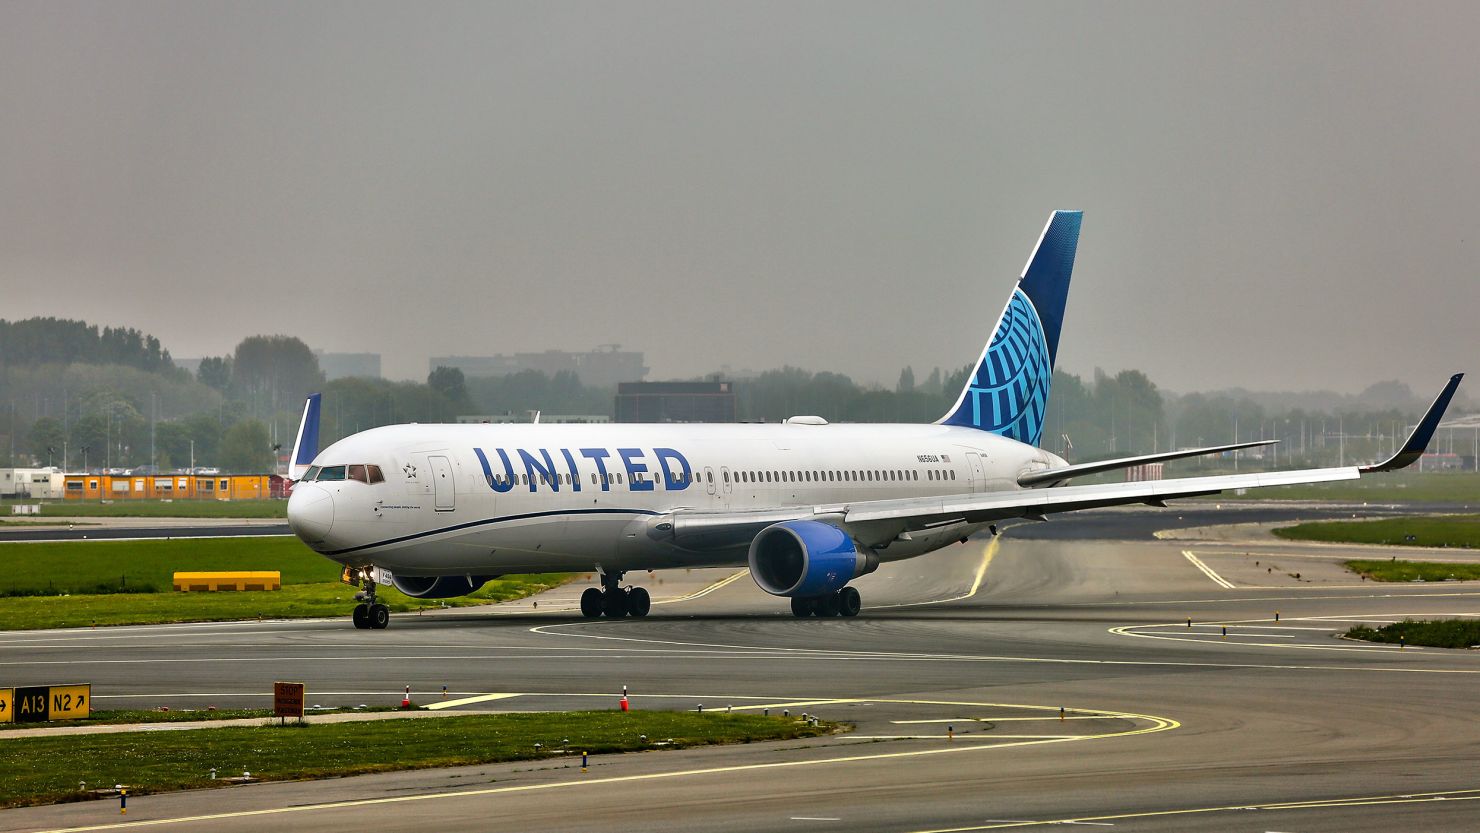 United Airlines Boeing 767-322(ER) airplane at Amsterdam Airport Schiphol in Amsterdam, Netherlands on May 03, 2022.